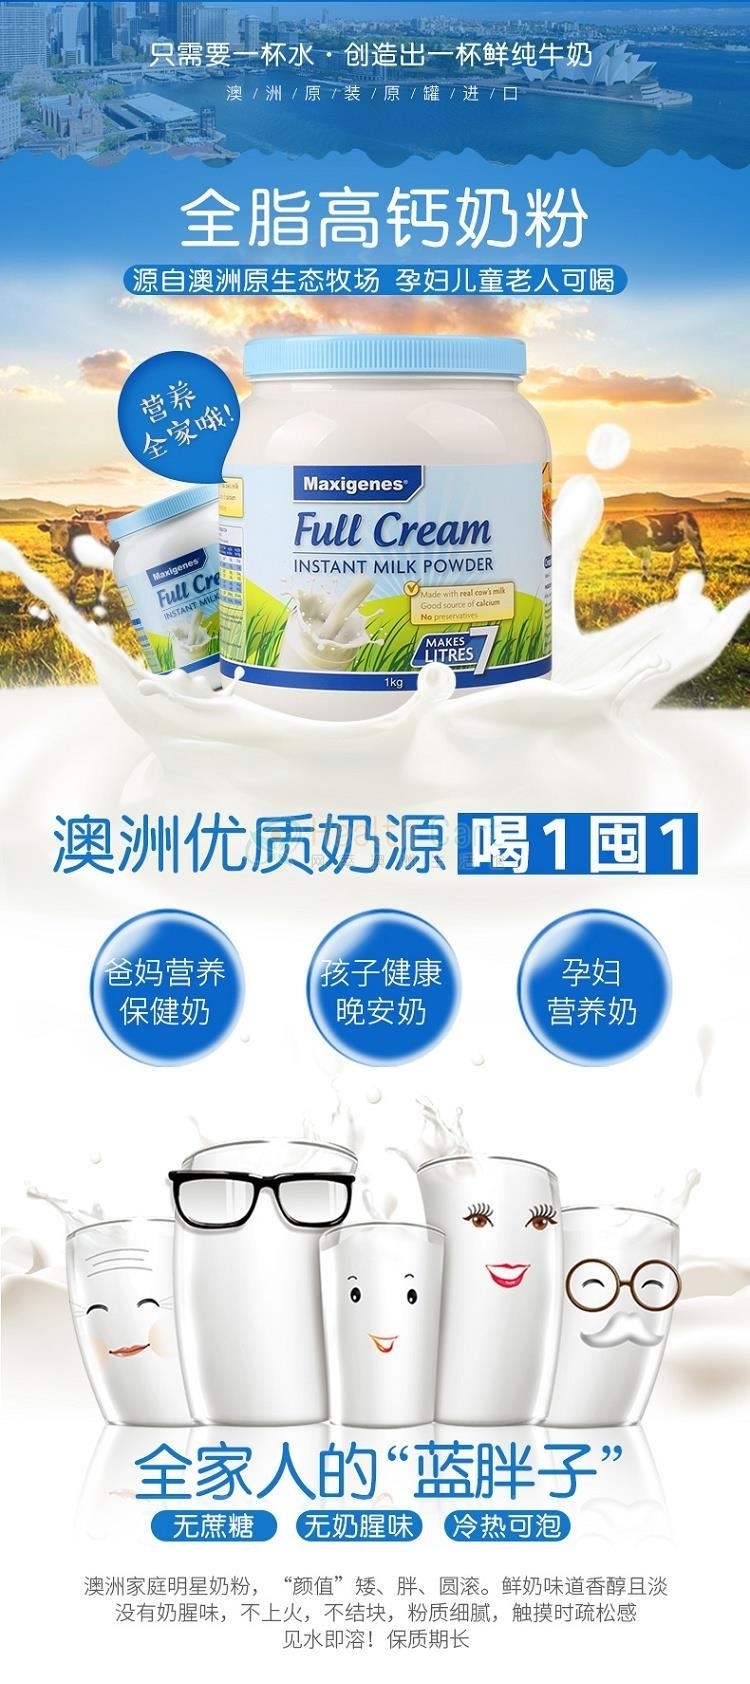 Maxigenes Full Cream Instant Milk Powder 1kg（Ship to Chinese Mainland only，Maximum  6 cans per order） - @maxigenes full cream instant milk powder 1kgship to chinese mainland onlymaximum 6 cans per order - 3 - Health Cart